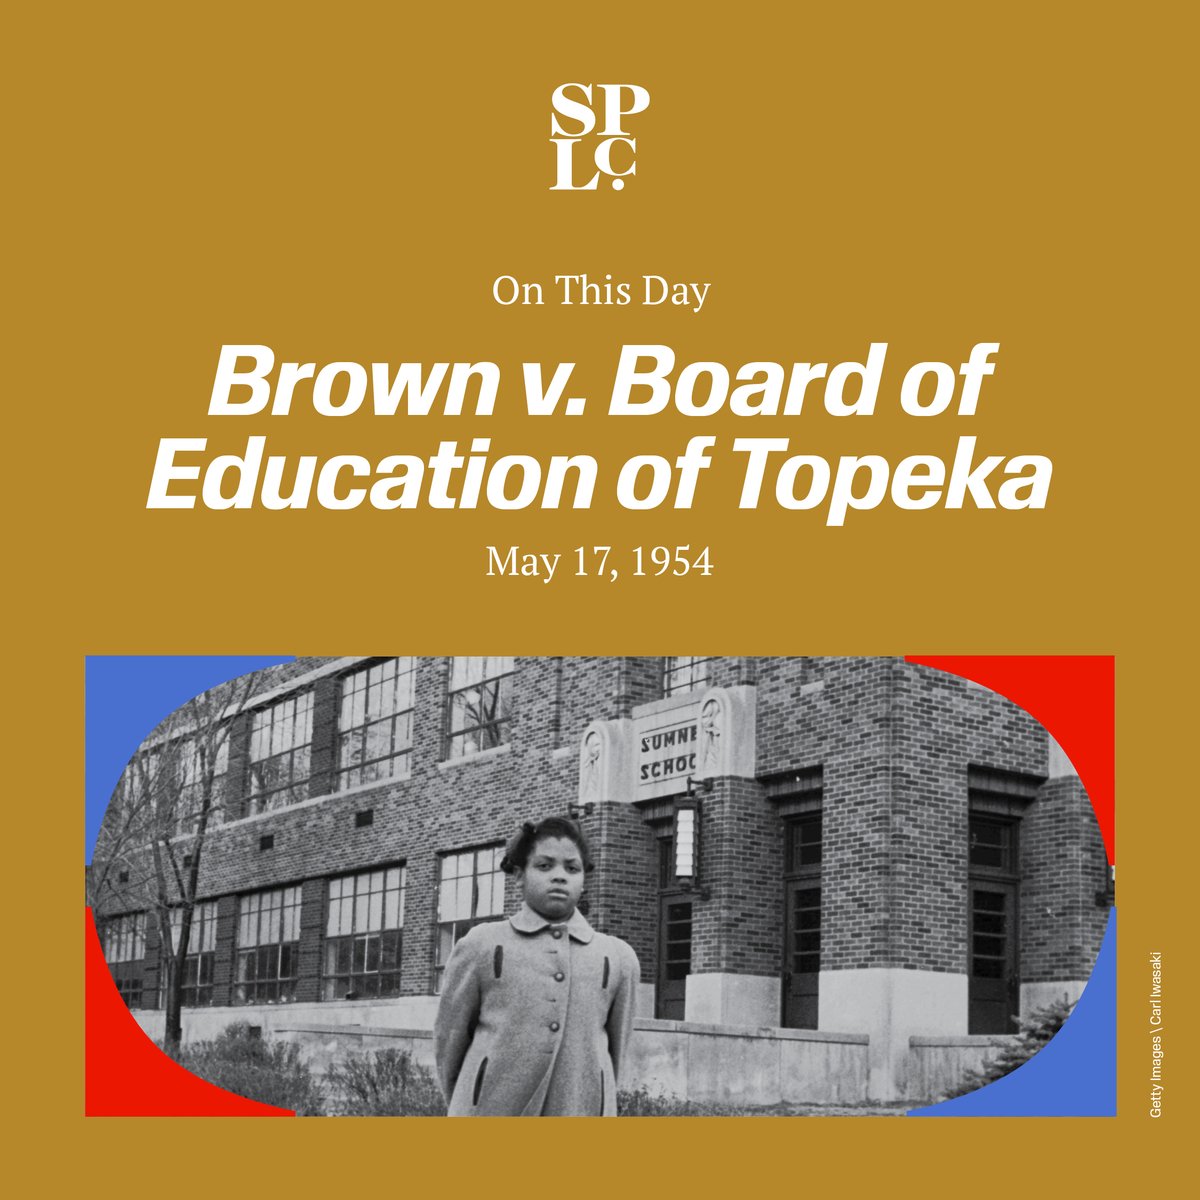 in 1950 Linda Brown was denied admissions at her local elementary school because of the color of her skin. OTD in 1954, a historic Supreme Court decision was made ruling that racial segregation in public educational facilities is unconstitutional. #TheMarchContinues